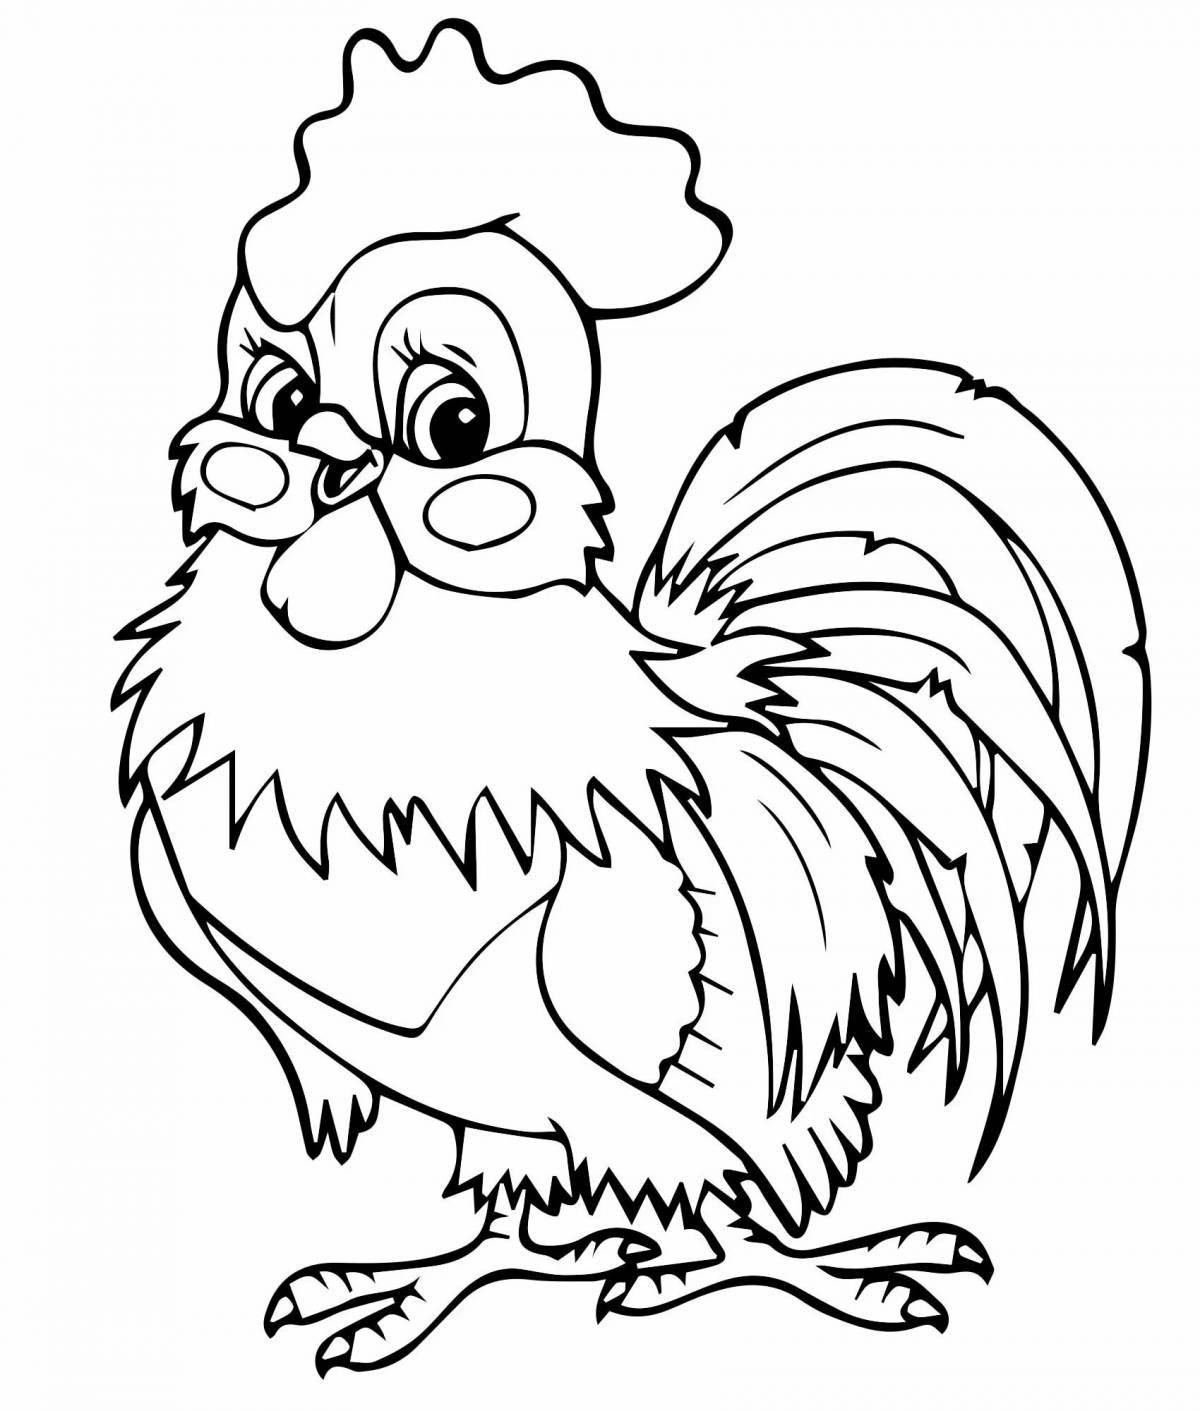 Rooster picture for kids #2